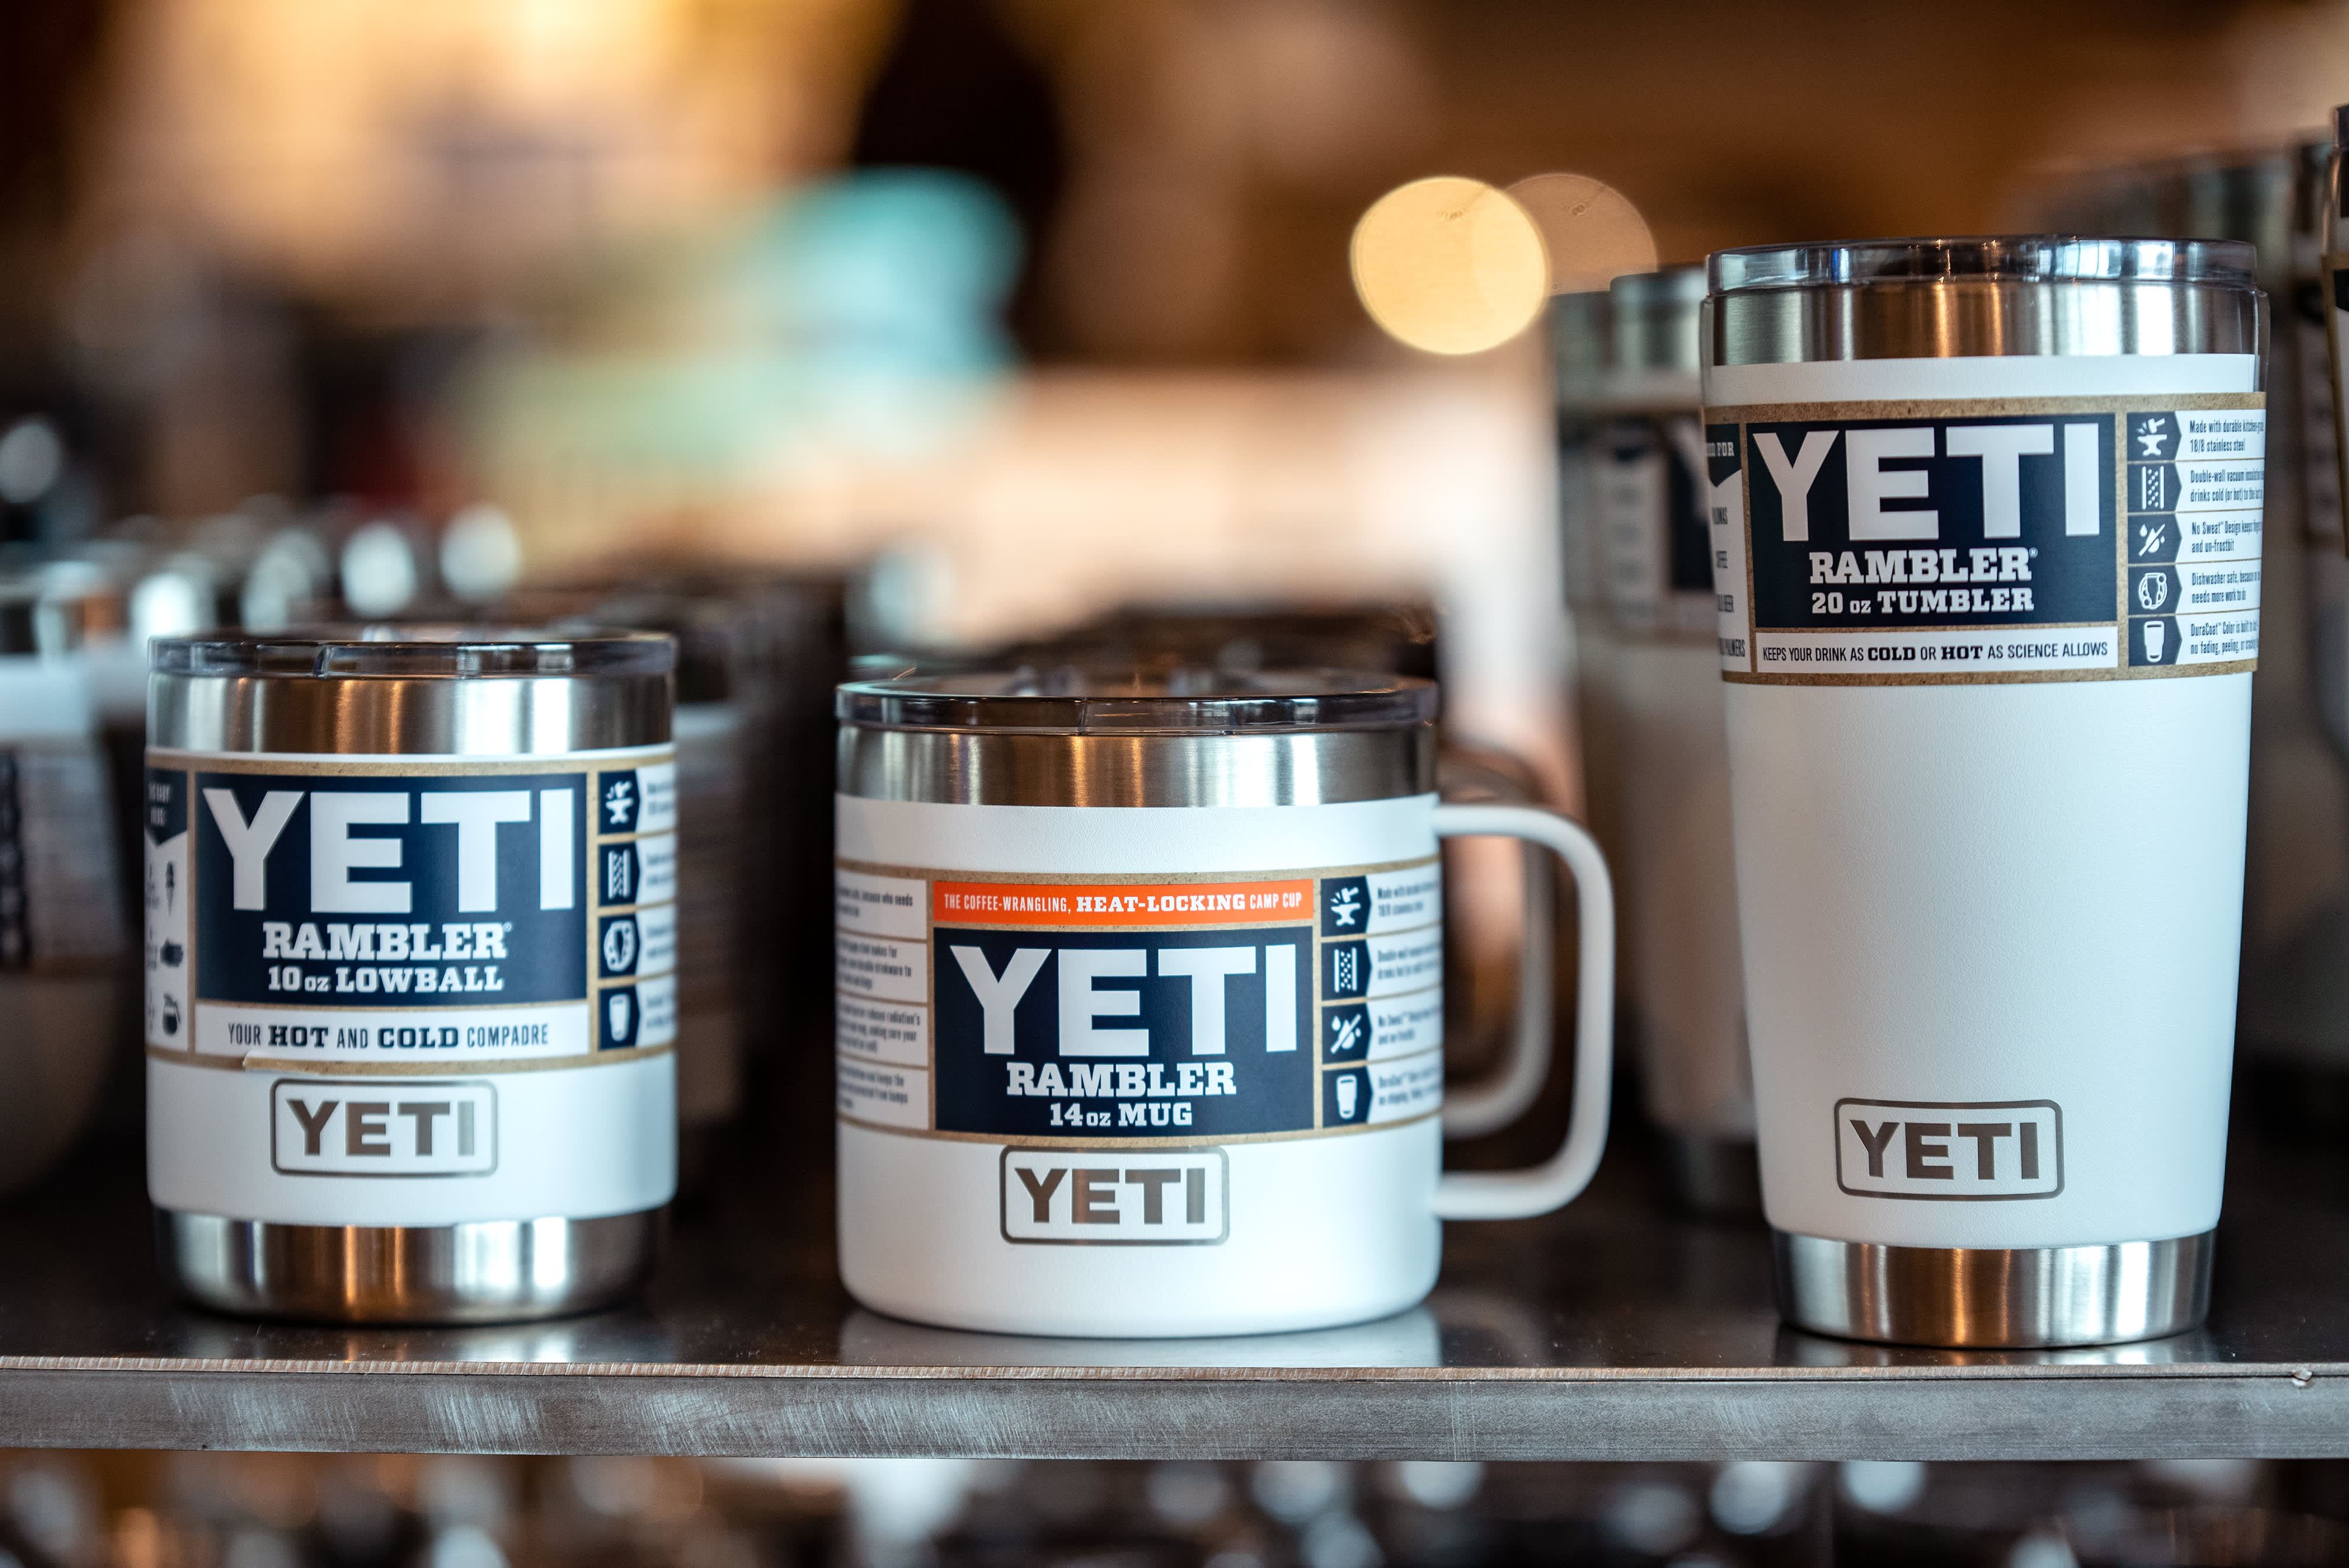 Yeti Expands with 4 New Products